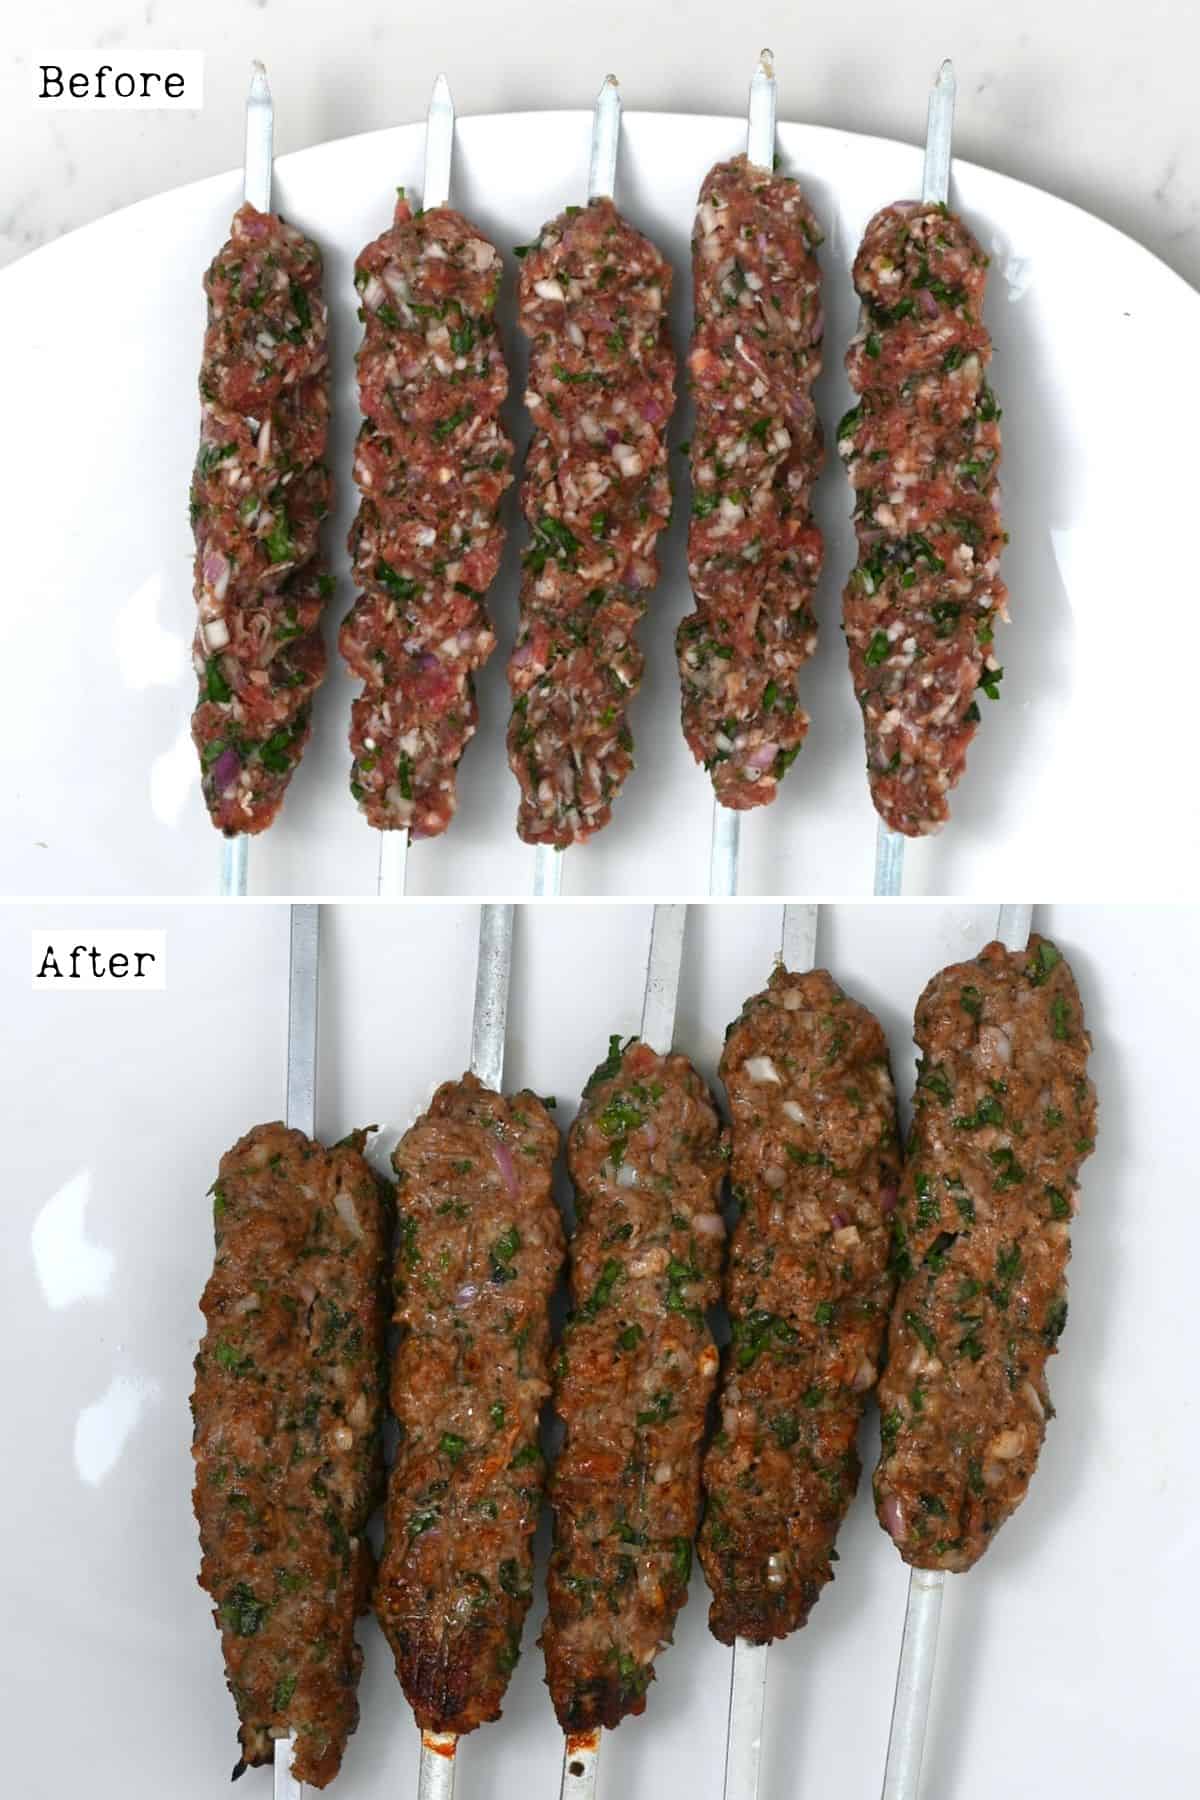 Before and after cooking kofta skewers